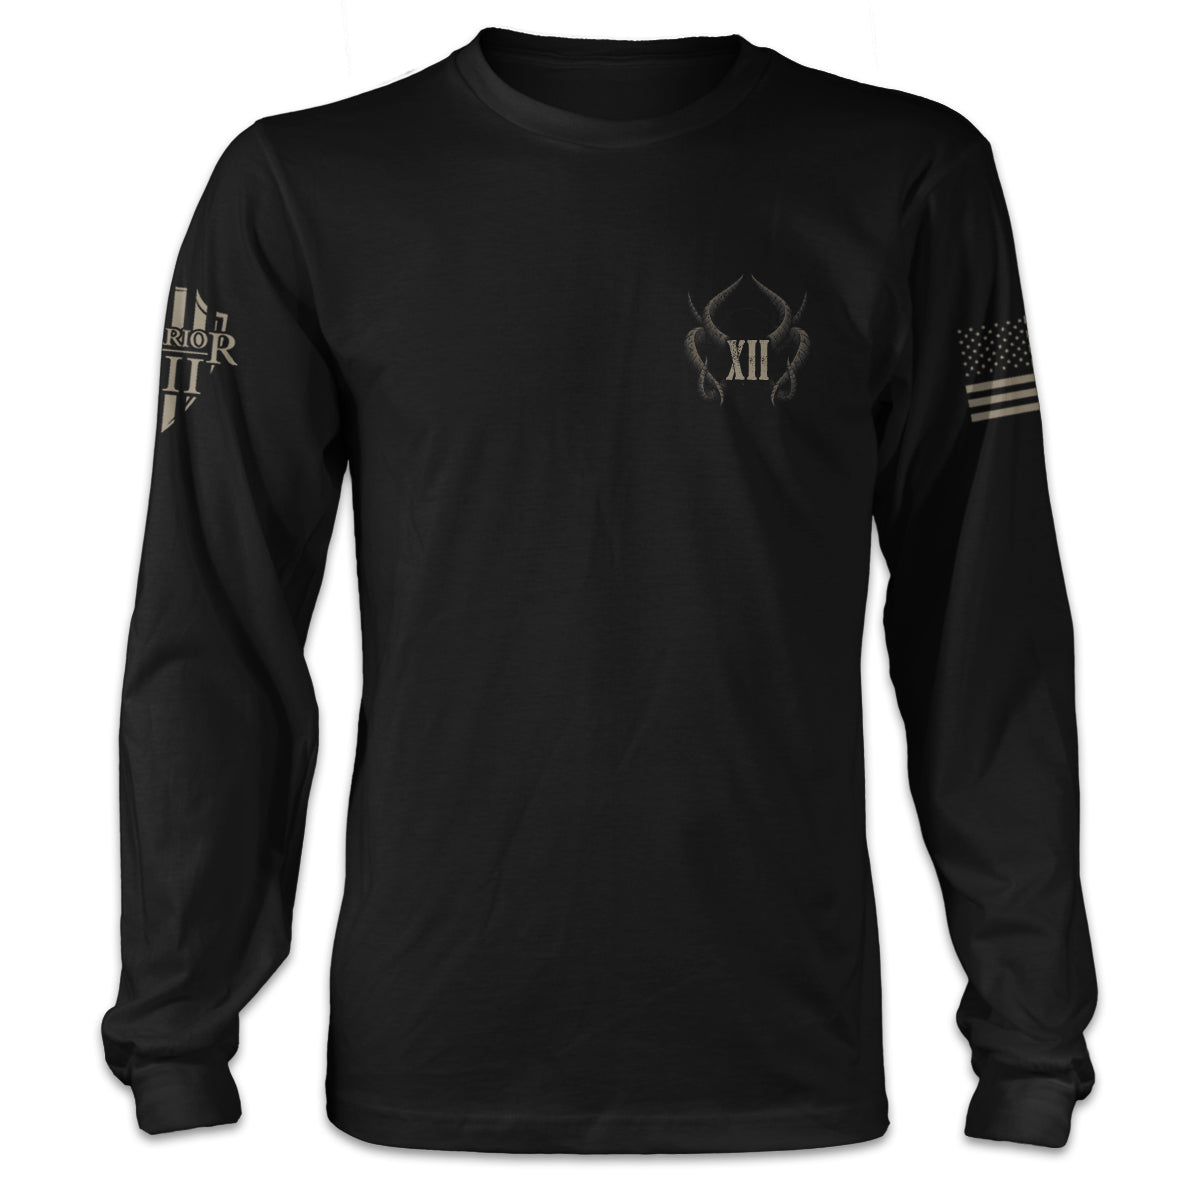 A black long sleeve shirt with roman numerals XII and horns coming out of it printed on the front.